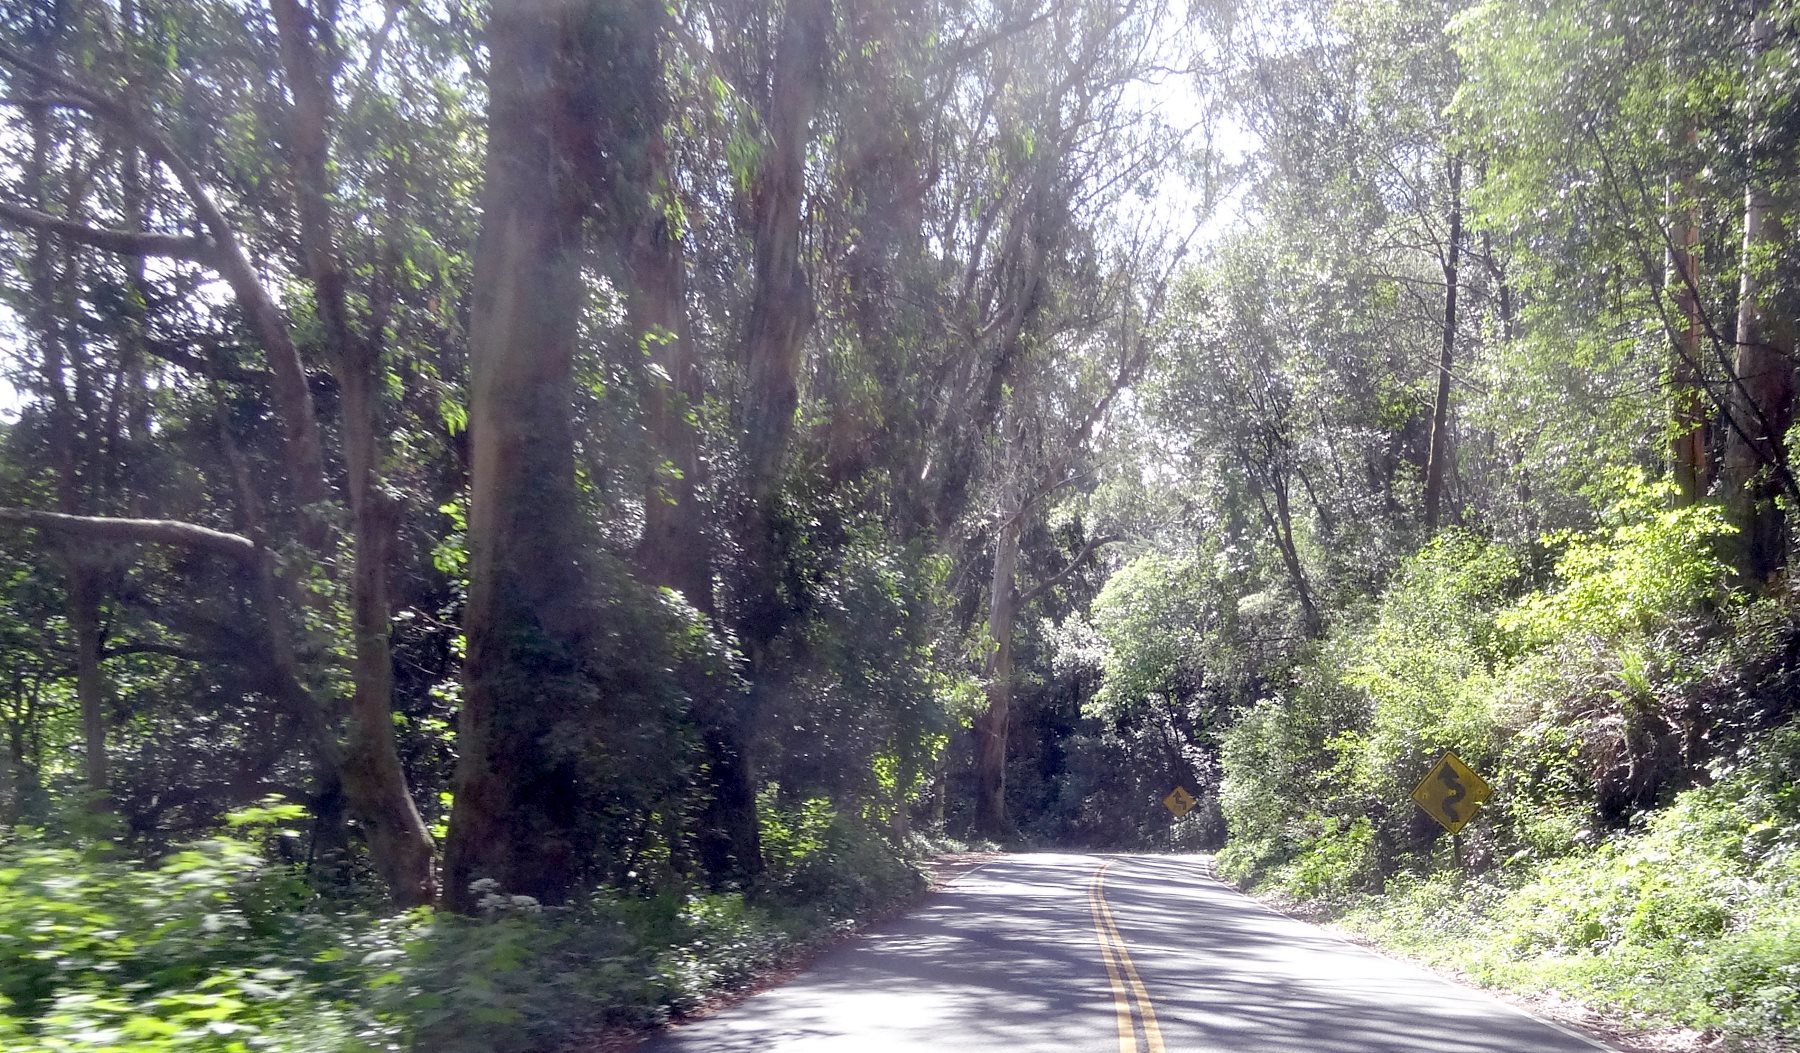 At the highest part of the road, it winds along a narrow creek as it starts to descend again towards Bolinas Bay.